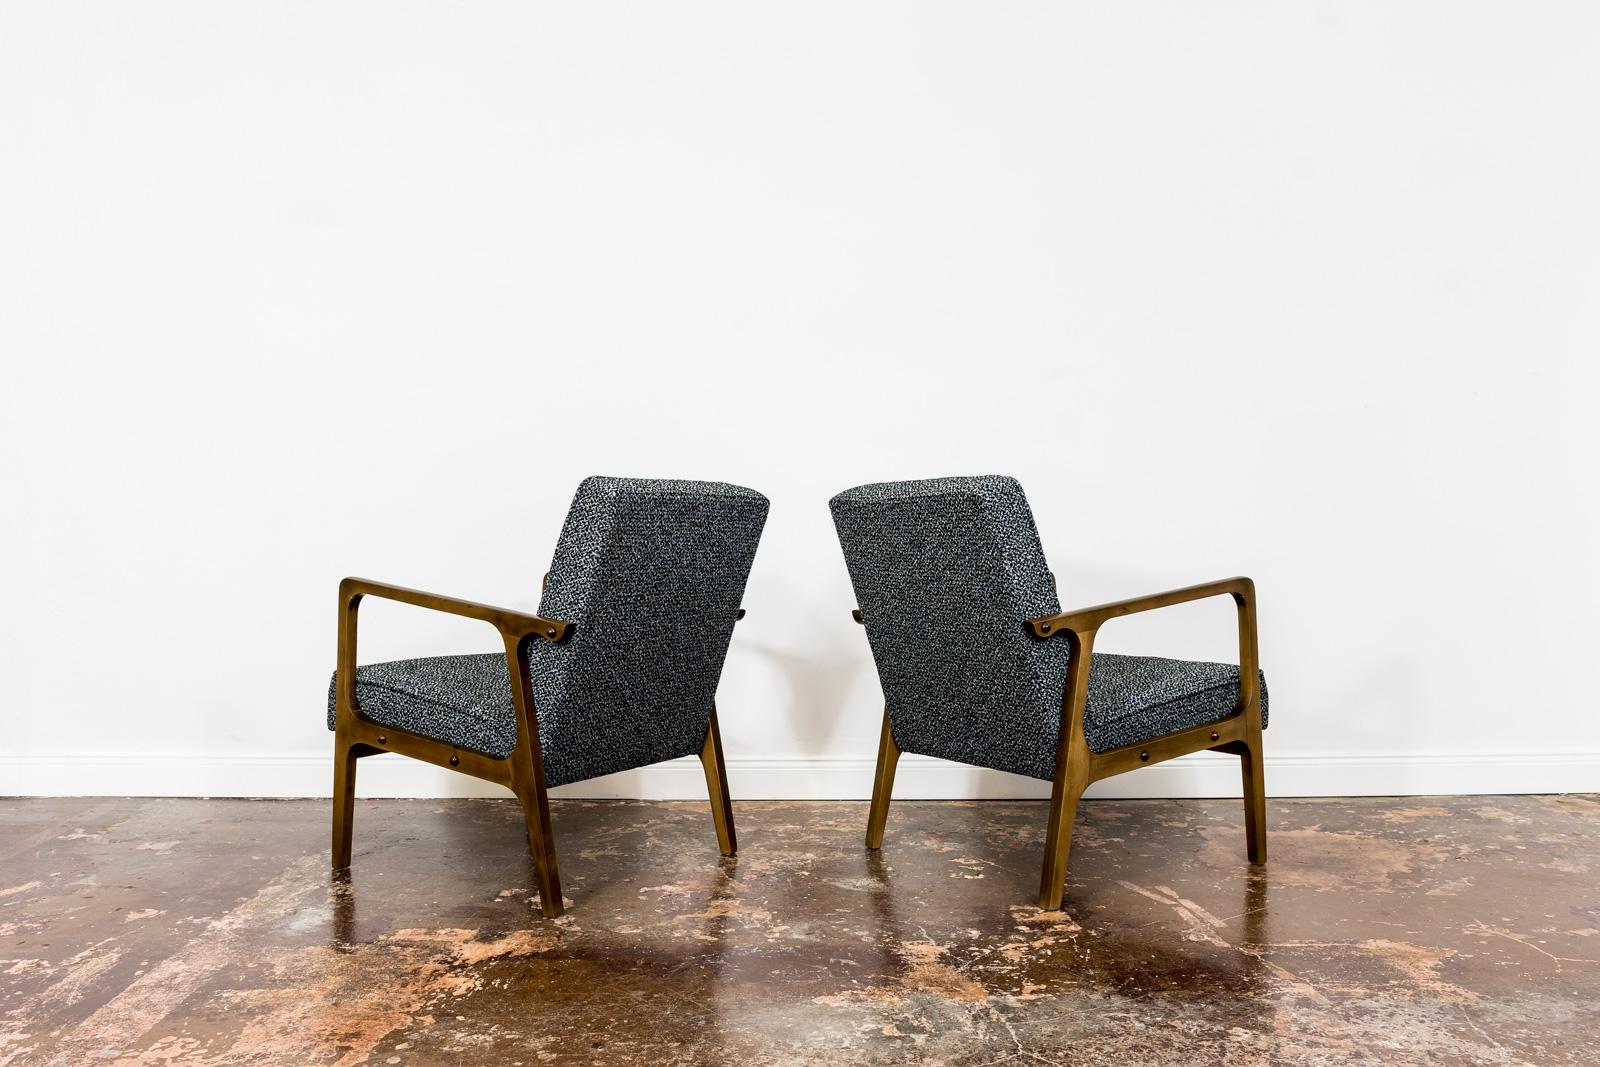 Pair Of Mid Century Armchairs Type 04-B From Bydgoskie Fabryki Mebli, 1960's For Sale 1